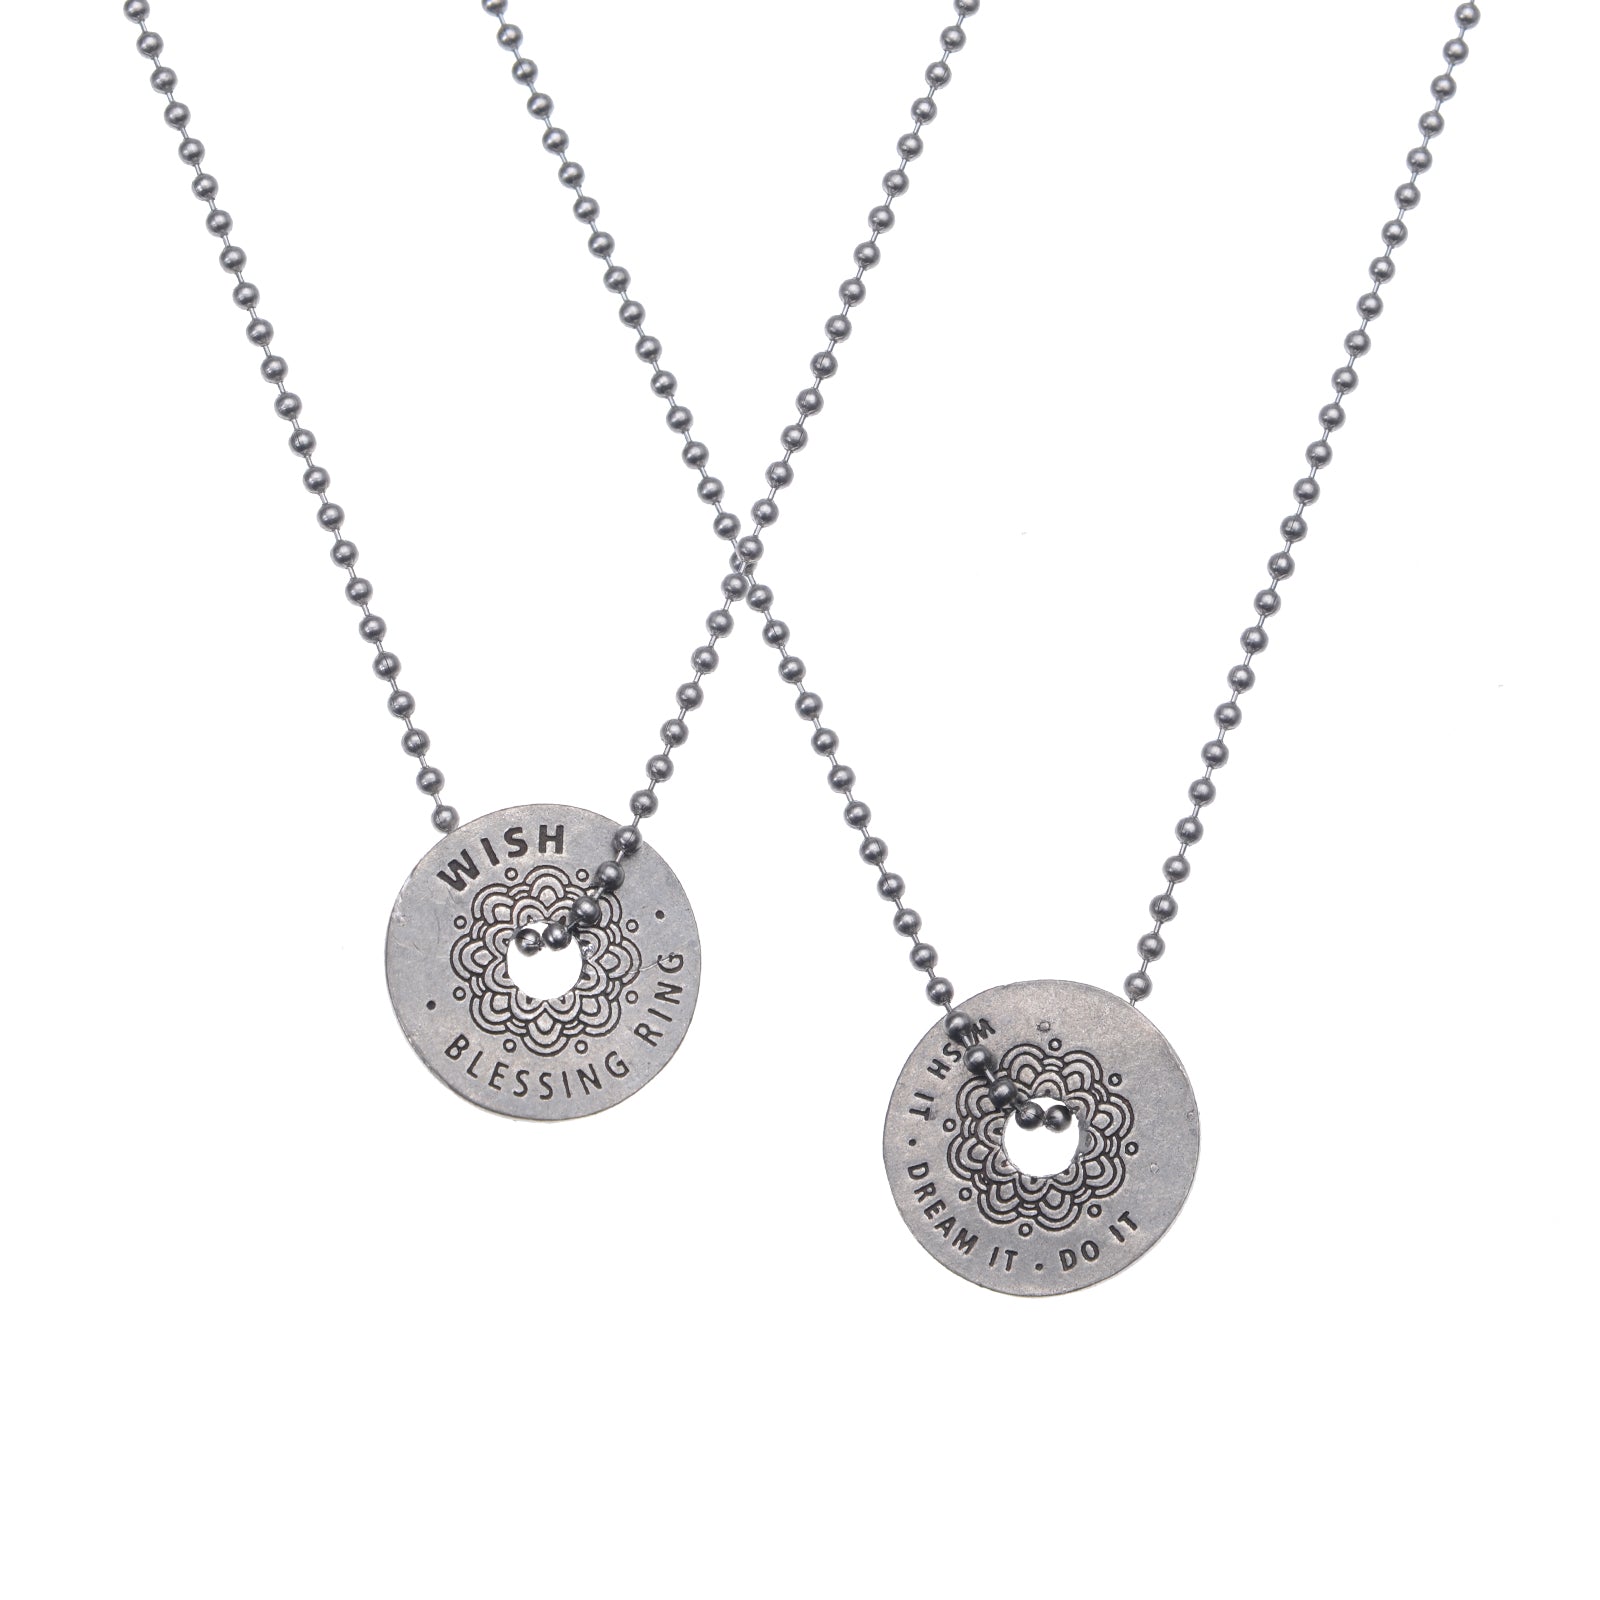 Wish Blessing Rings on a necklace